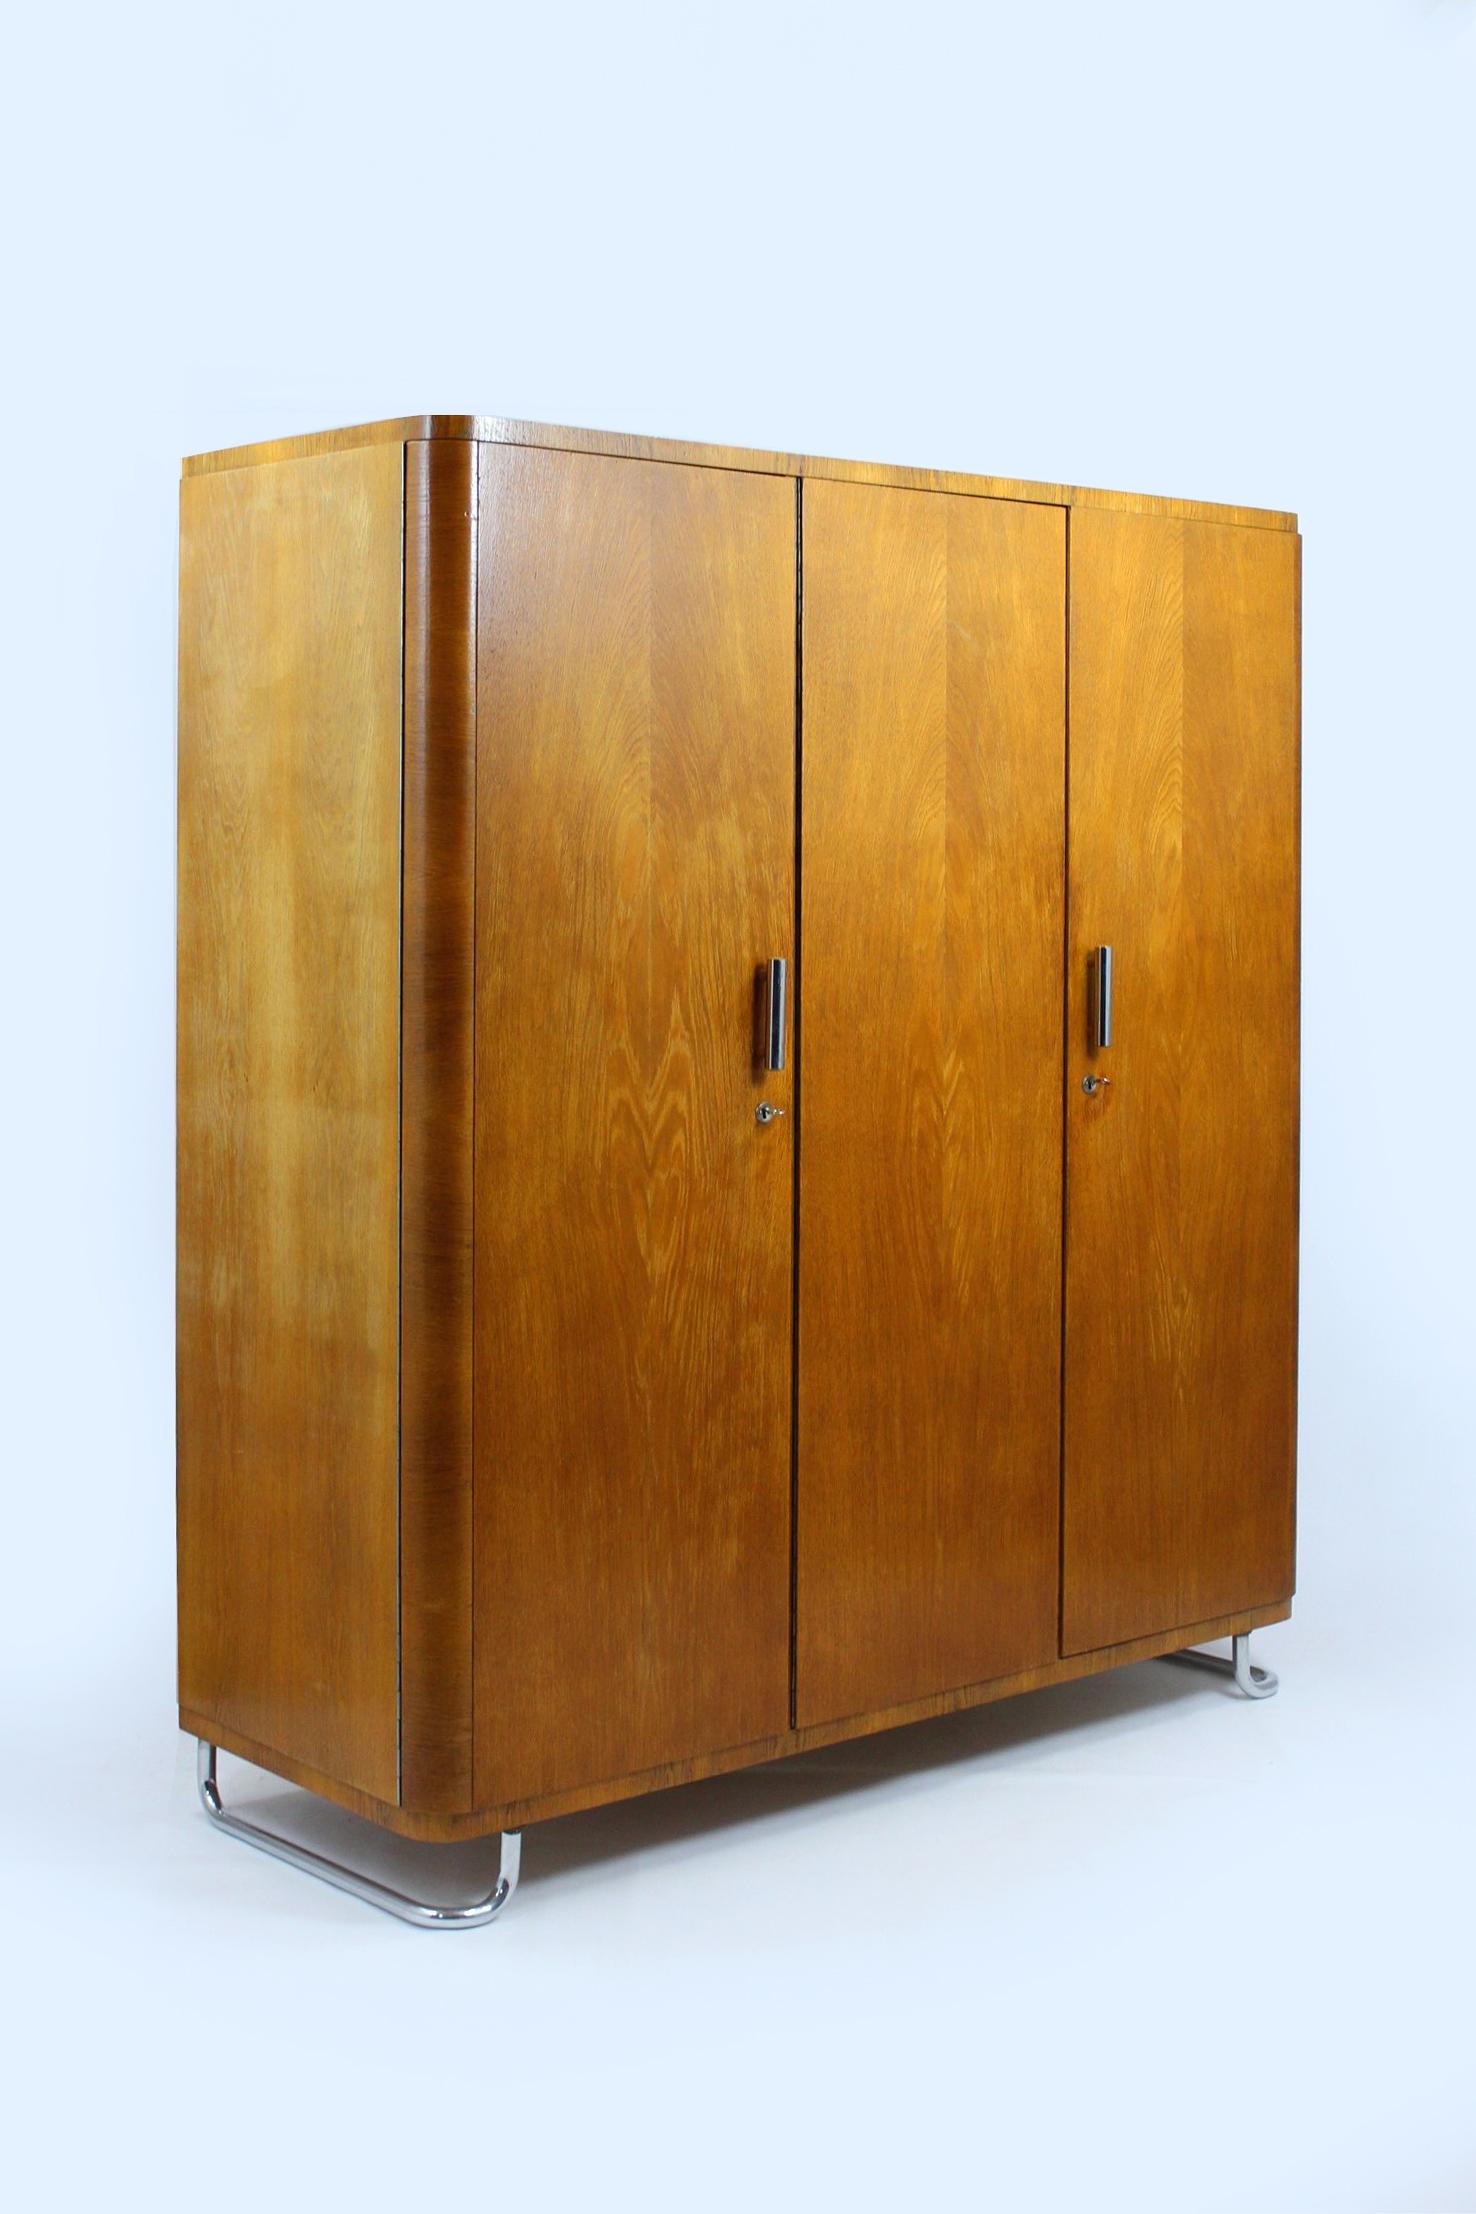 Vintage Bauhaus Chromed Tubular Steel Wardrobe by Hynek Gottwald, 1930s In Good Condition For Sale In Żory, PL